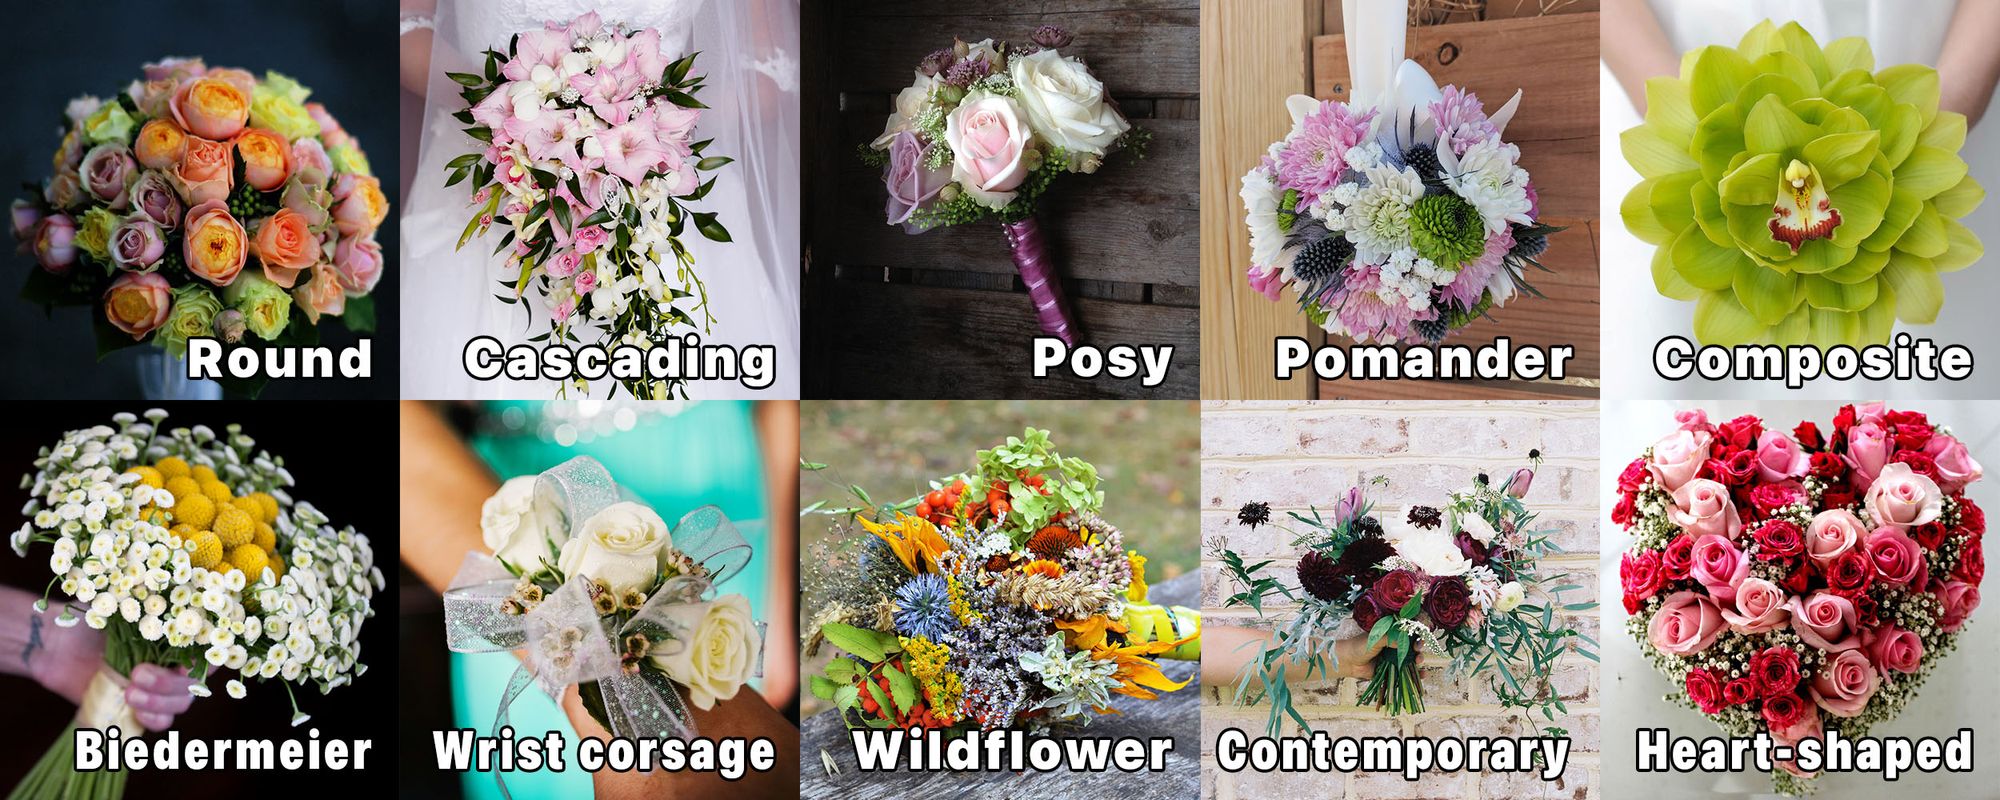 Types of Flowers: Garden, Bouquet, Tropical and More!